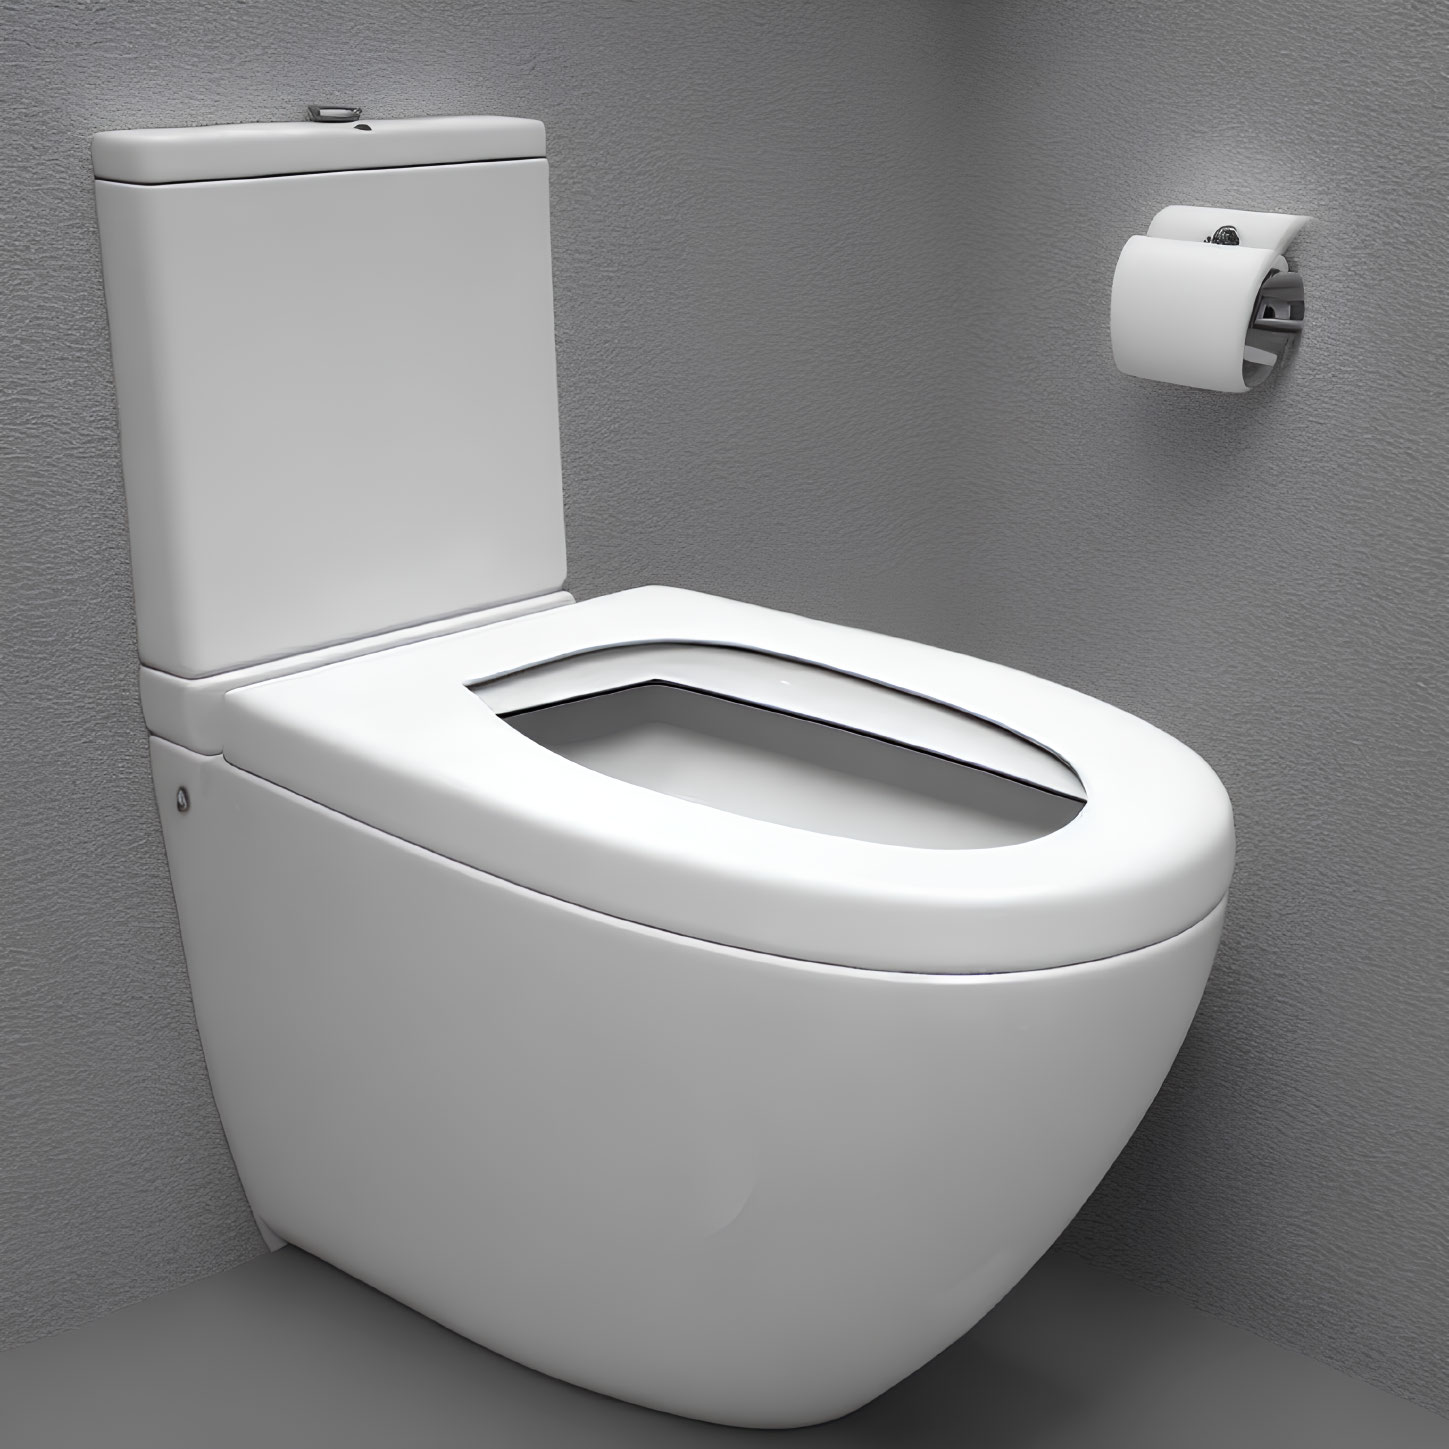 White Ceramic Toilet with Open Lid on Grey Background Next to Toilet Paper Holder